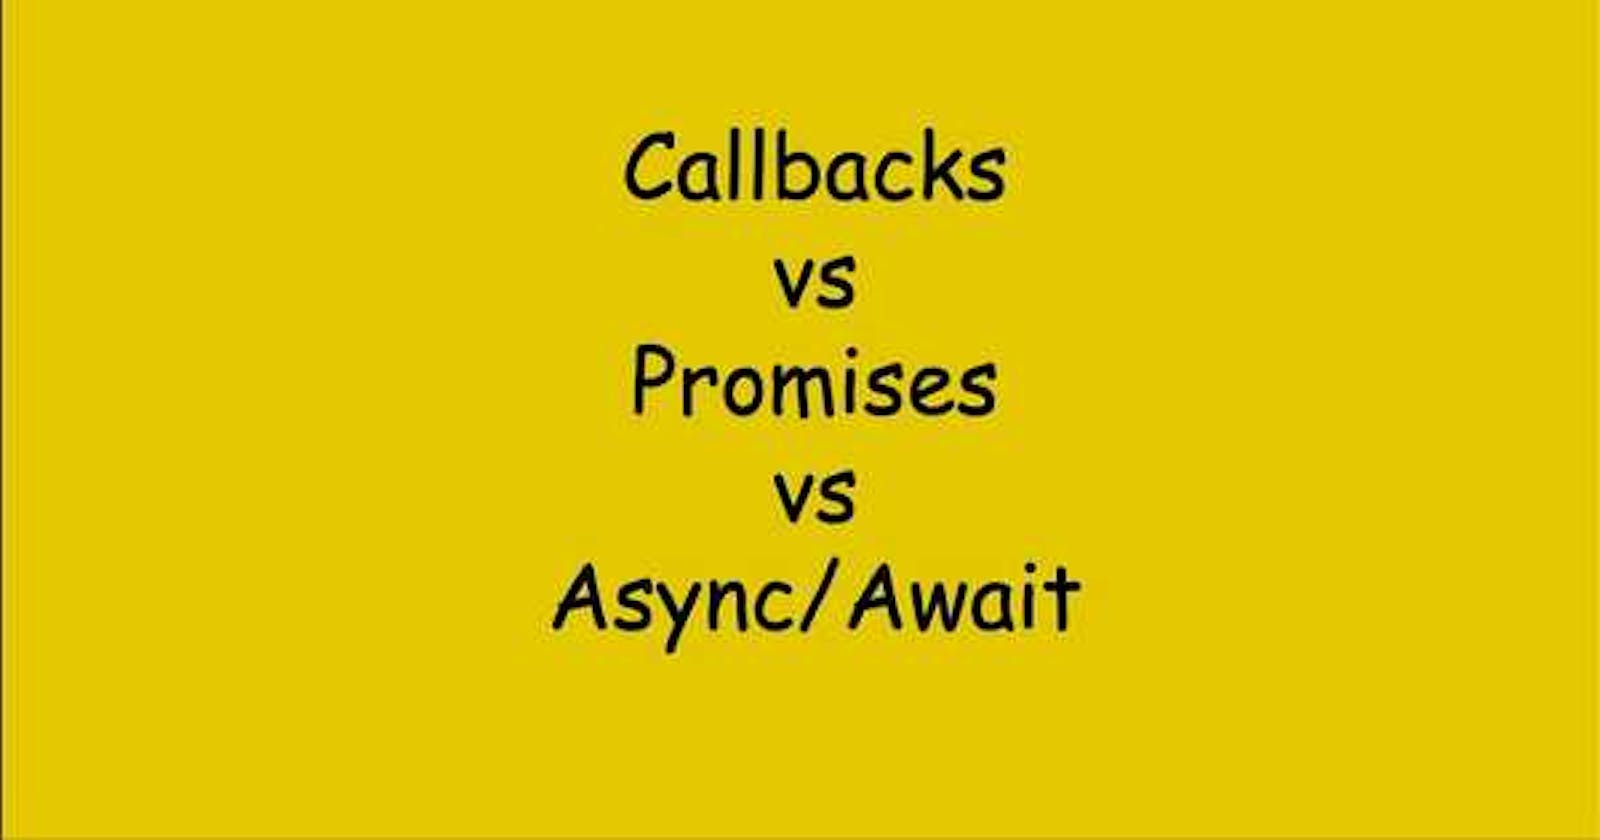 Realworld Example to remember Callbacks, Promises, and Async/Await in JavaScript